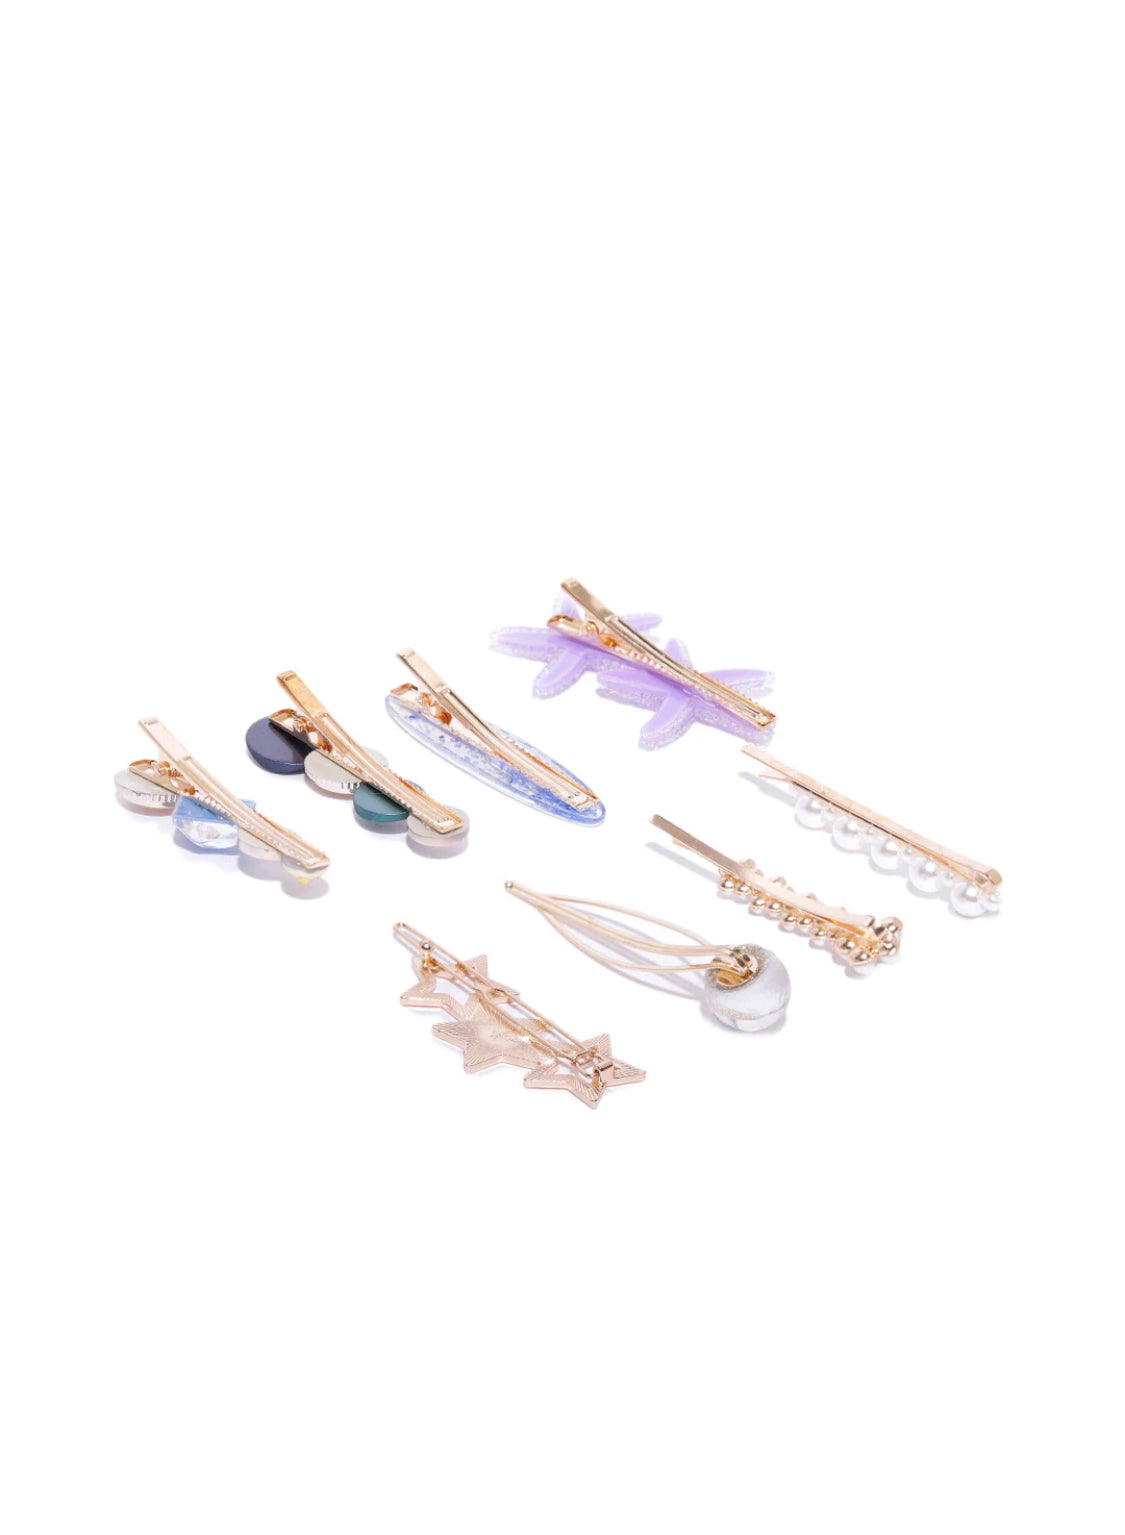 Set of 8 Hair Clips - Lilac